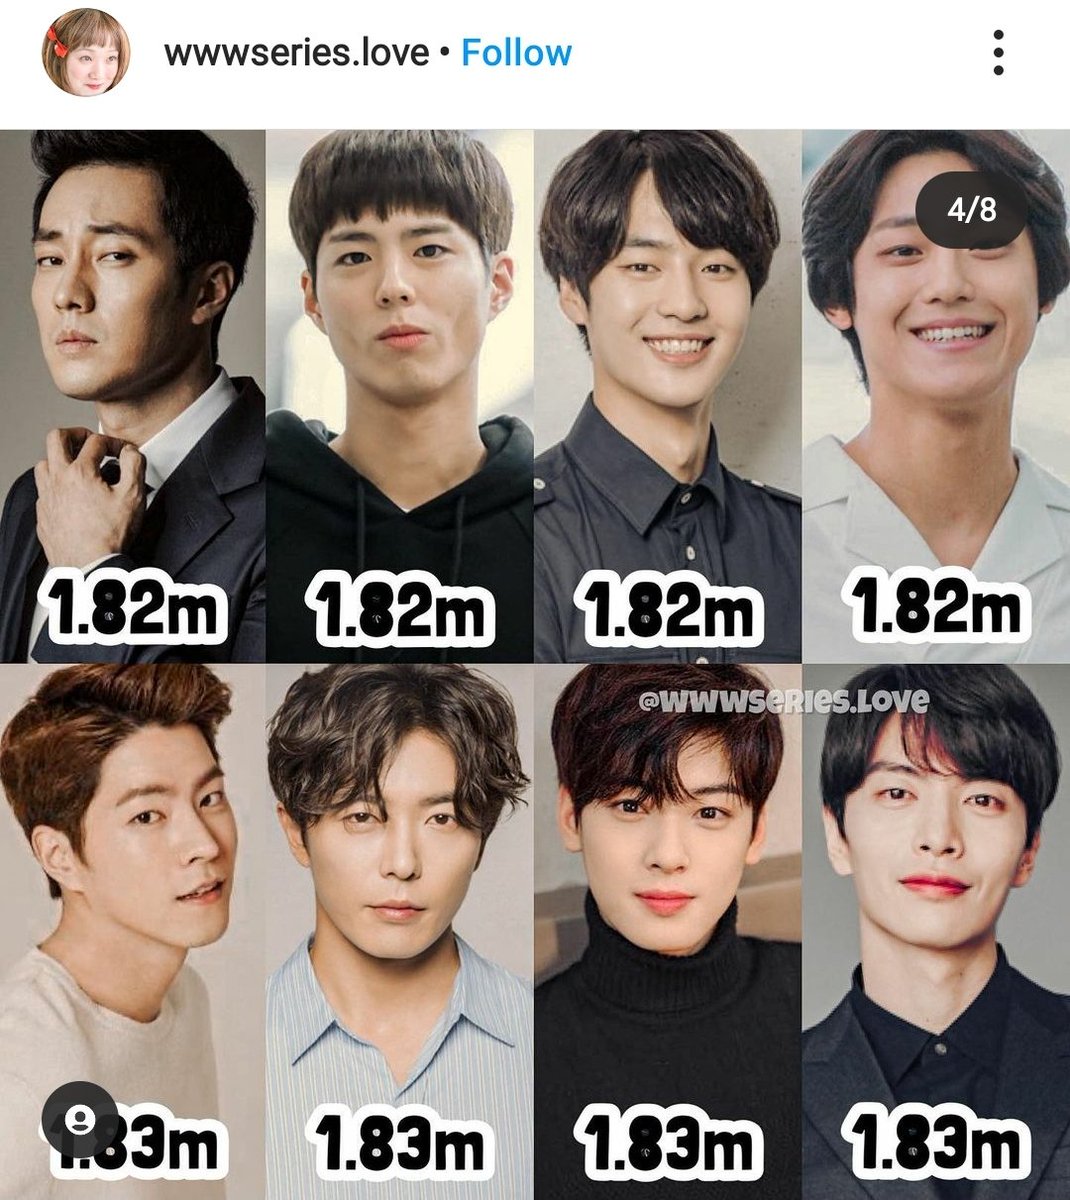 X 上的Andie：「Wtf seriously, the average height of South Korean men is 171cm  Where did all of these tall actors come from?! 🤯 Must be some kind of  genetic mutation https://t.co/TMLA7j21k8」 /